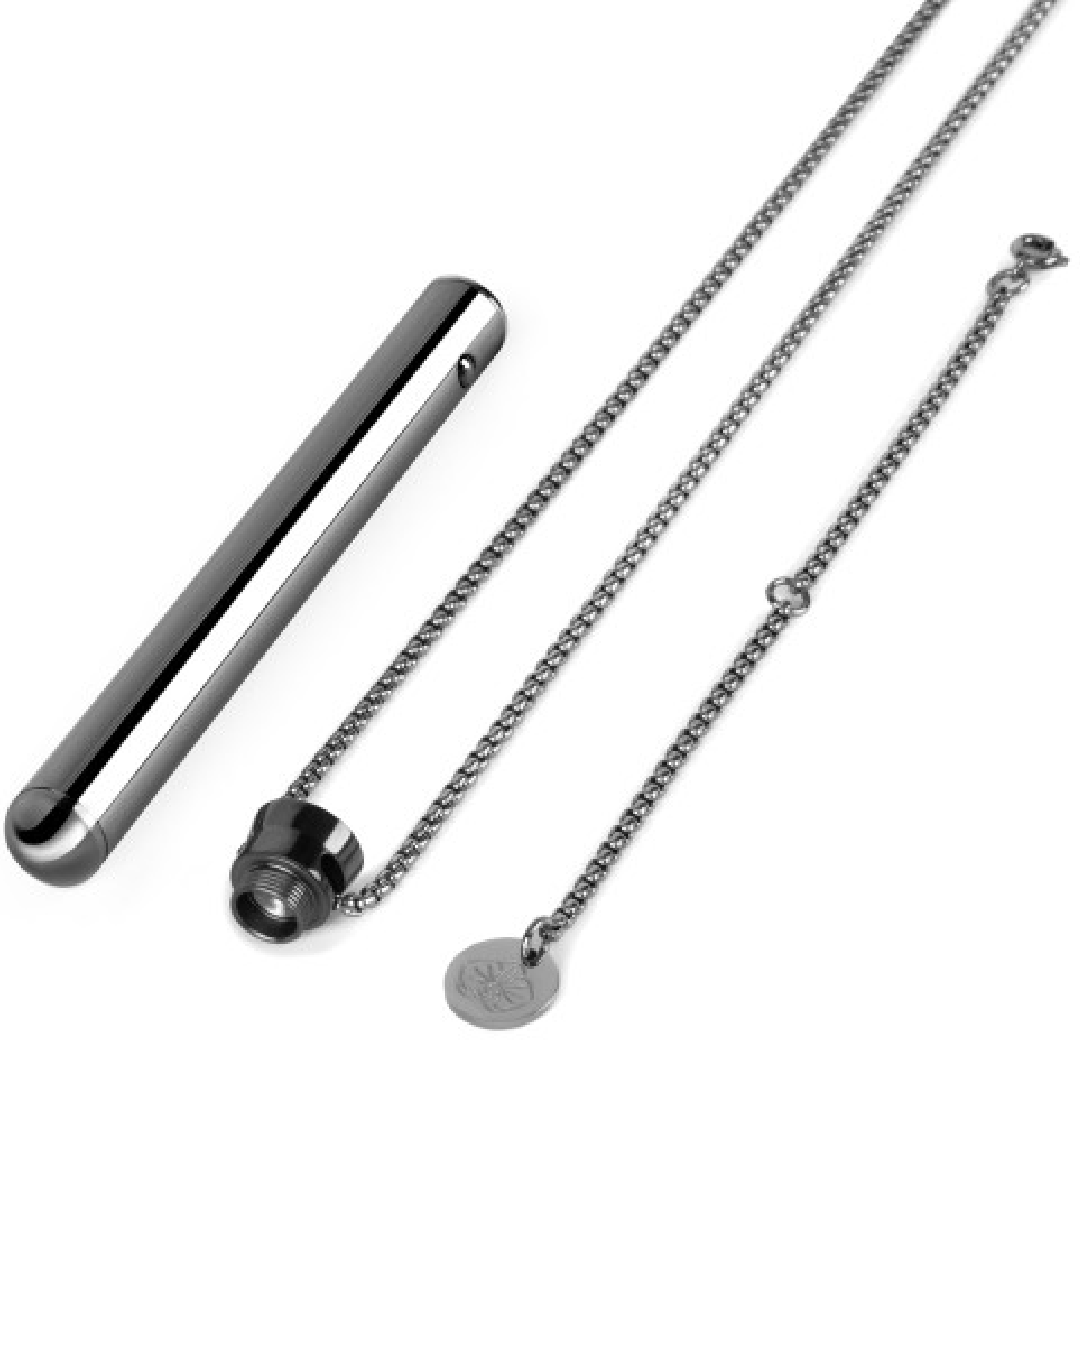 Le Wand Vibrating Necklace - Black vibe next to chain and extender 